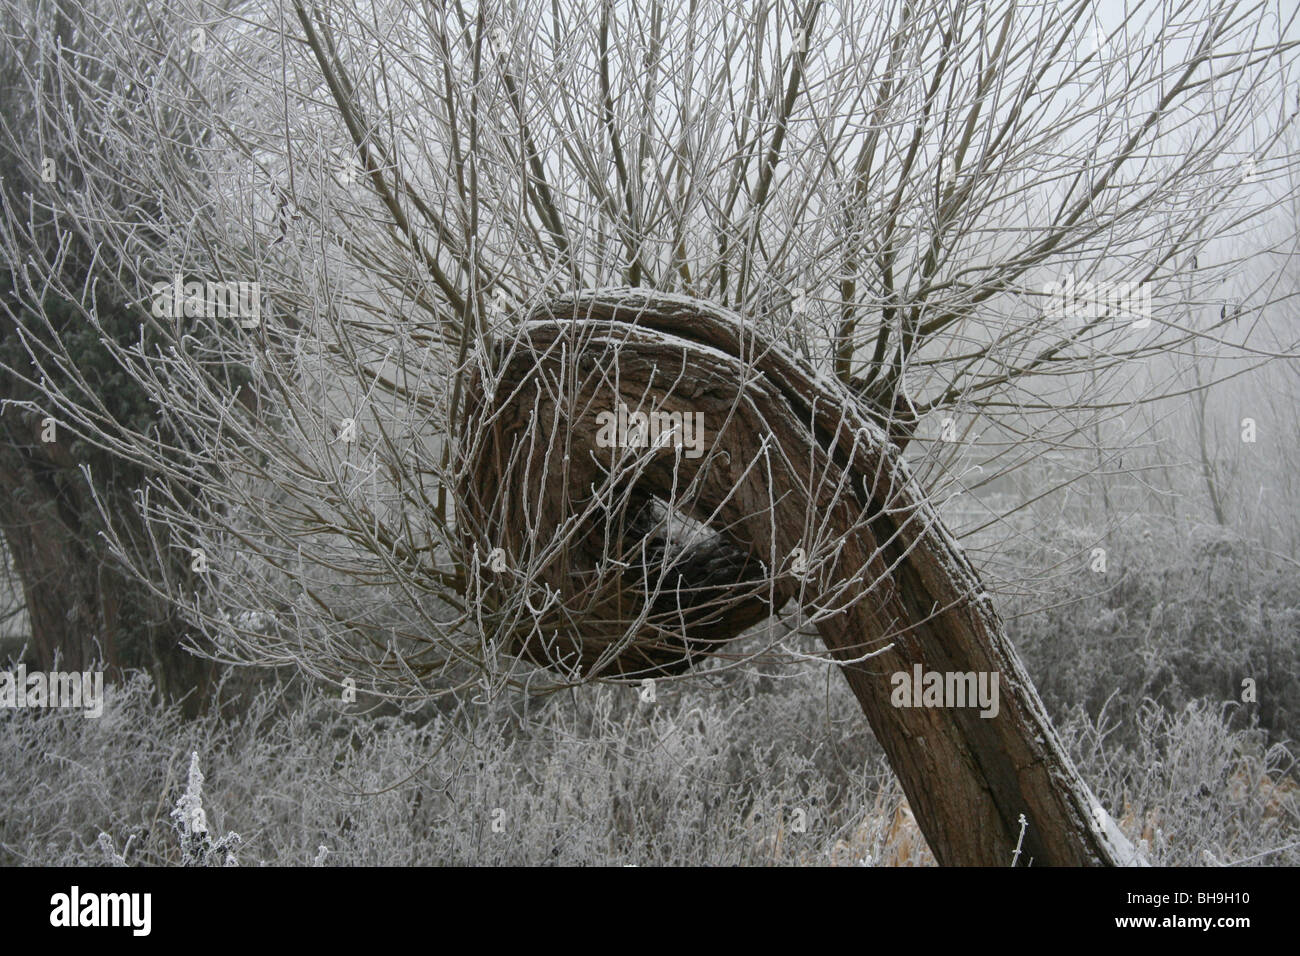 Frozen distorted tree,in the shape of a fist Witney, Oxfordshire, England UK Stock Photo